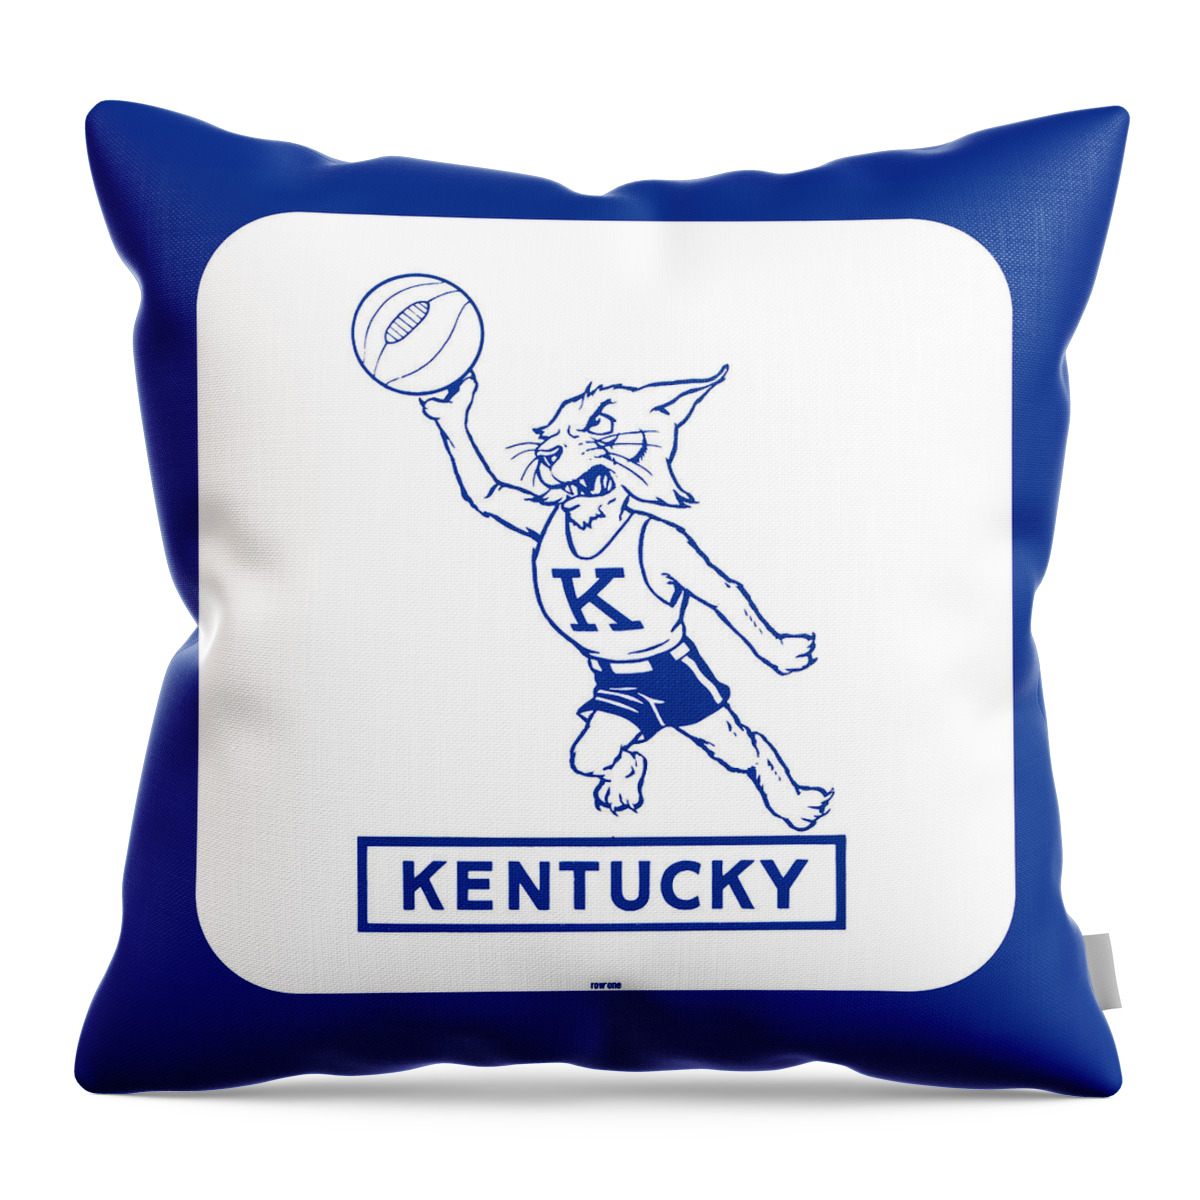 Kentucky Throw Pillow featuring the drawing Vintage Kentucky Wildcats Art by Row One Brand